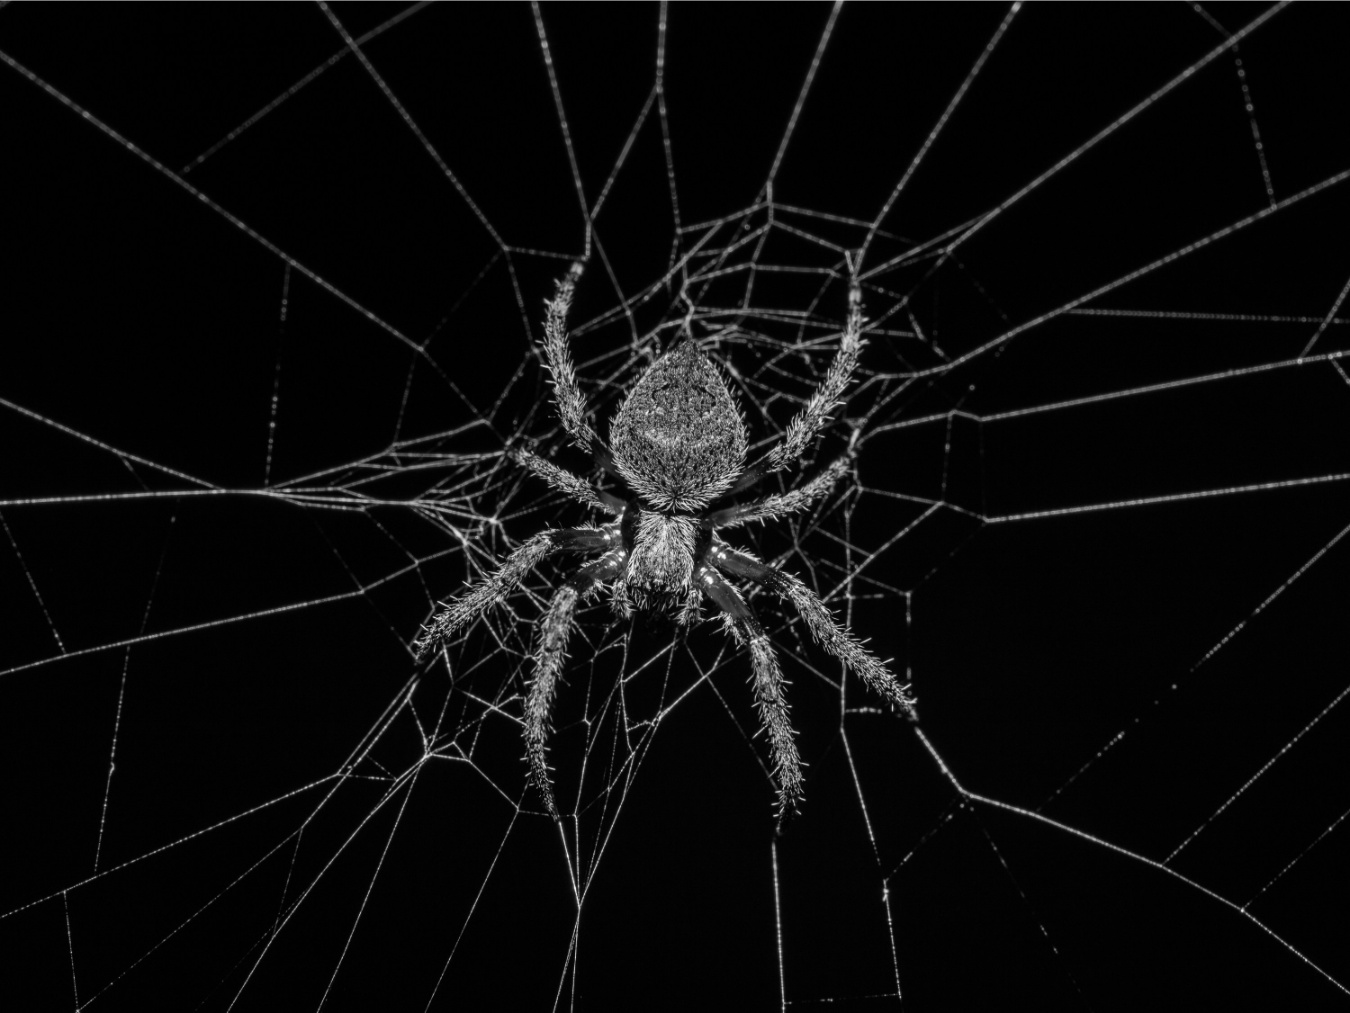 Spider on web outdoor or indoor black and white image